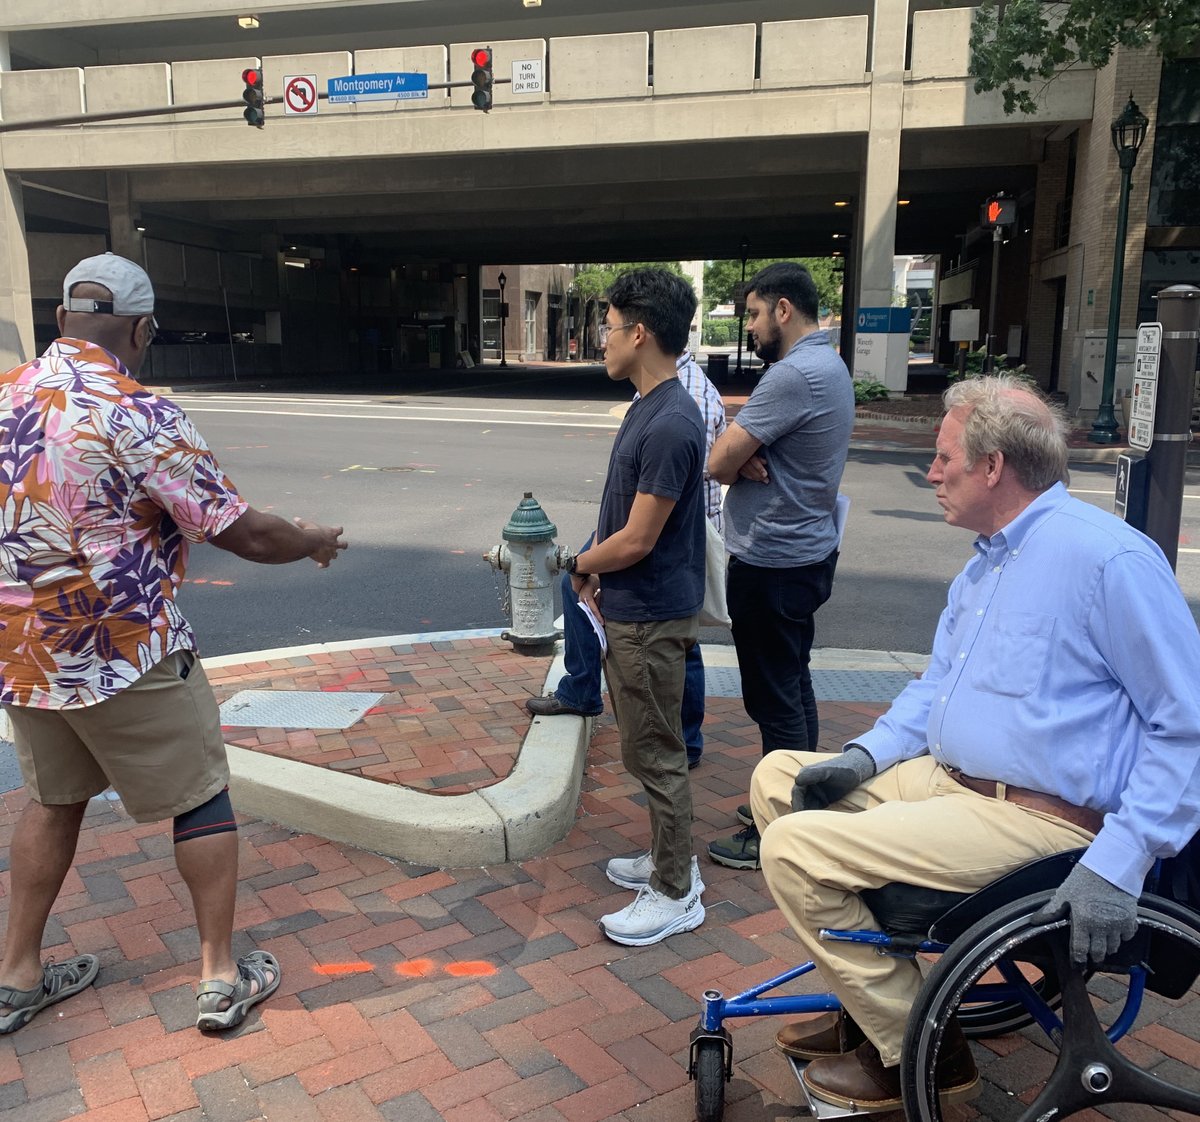 We were thrilled to be a part of the ADA Immersive Experience for Transportation PR actioners last weekend. Engineers were paired with disability advocates to gain knowledge of challenges that exist and the importance of ADA compliance. 

#ADA #ADACompliance #AccessibleStreets